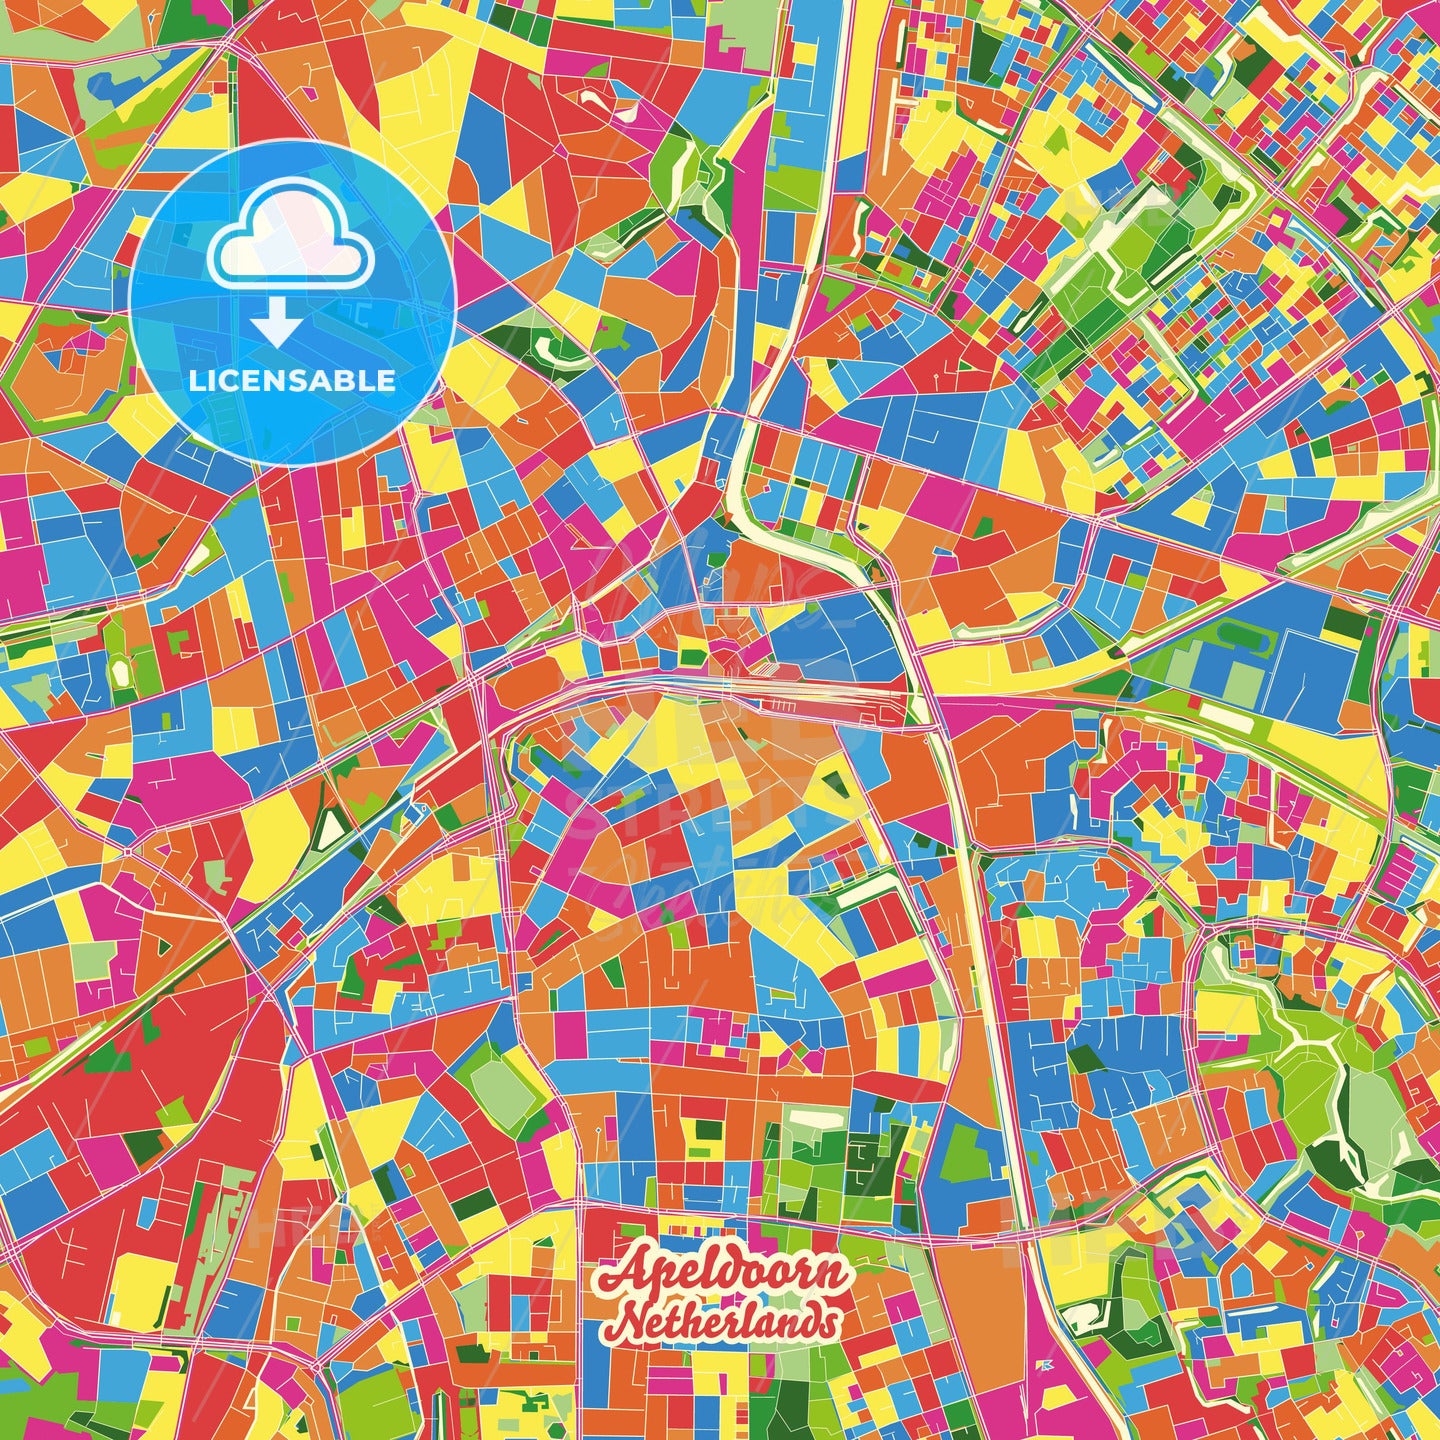 Apeldoorn, Netherlands Crazy Colorful Street Map Poster Template - HEBSTREITS Sketches